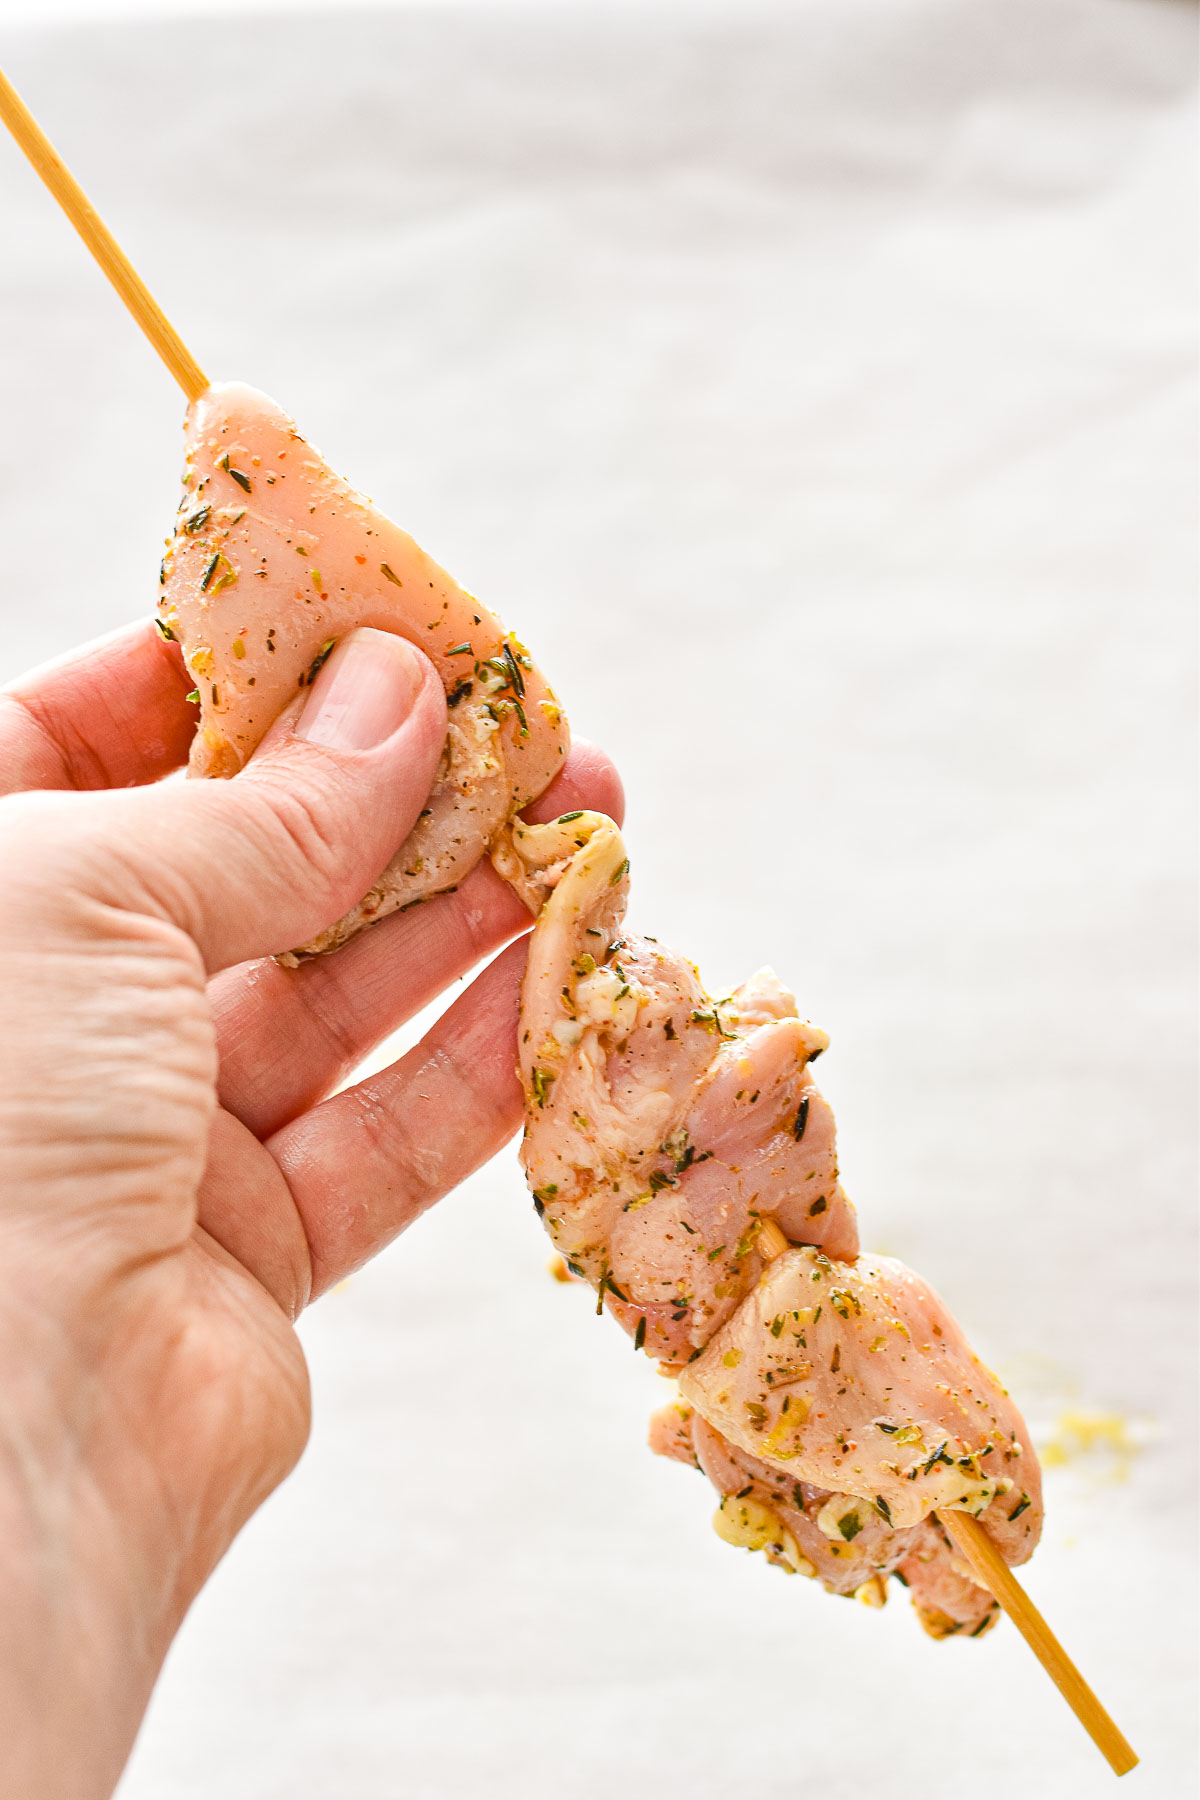 process shot of threading marinated chicken pieces onto a wooden skewer